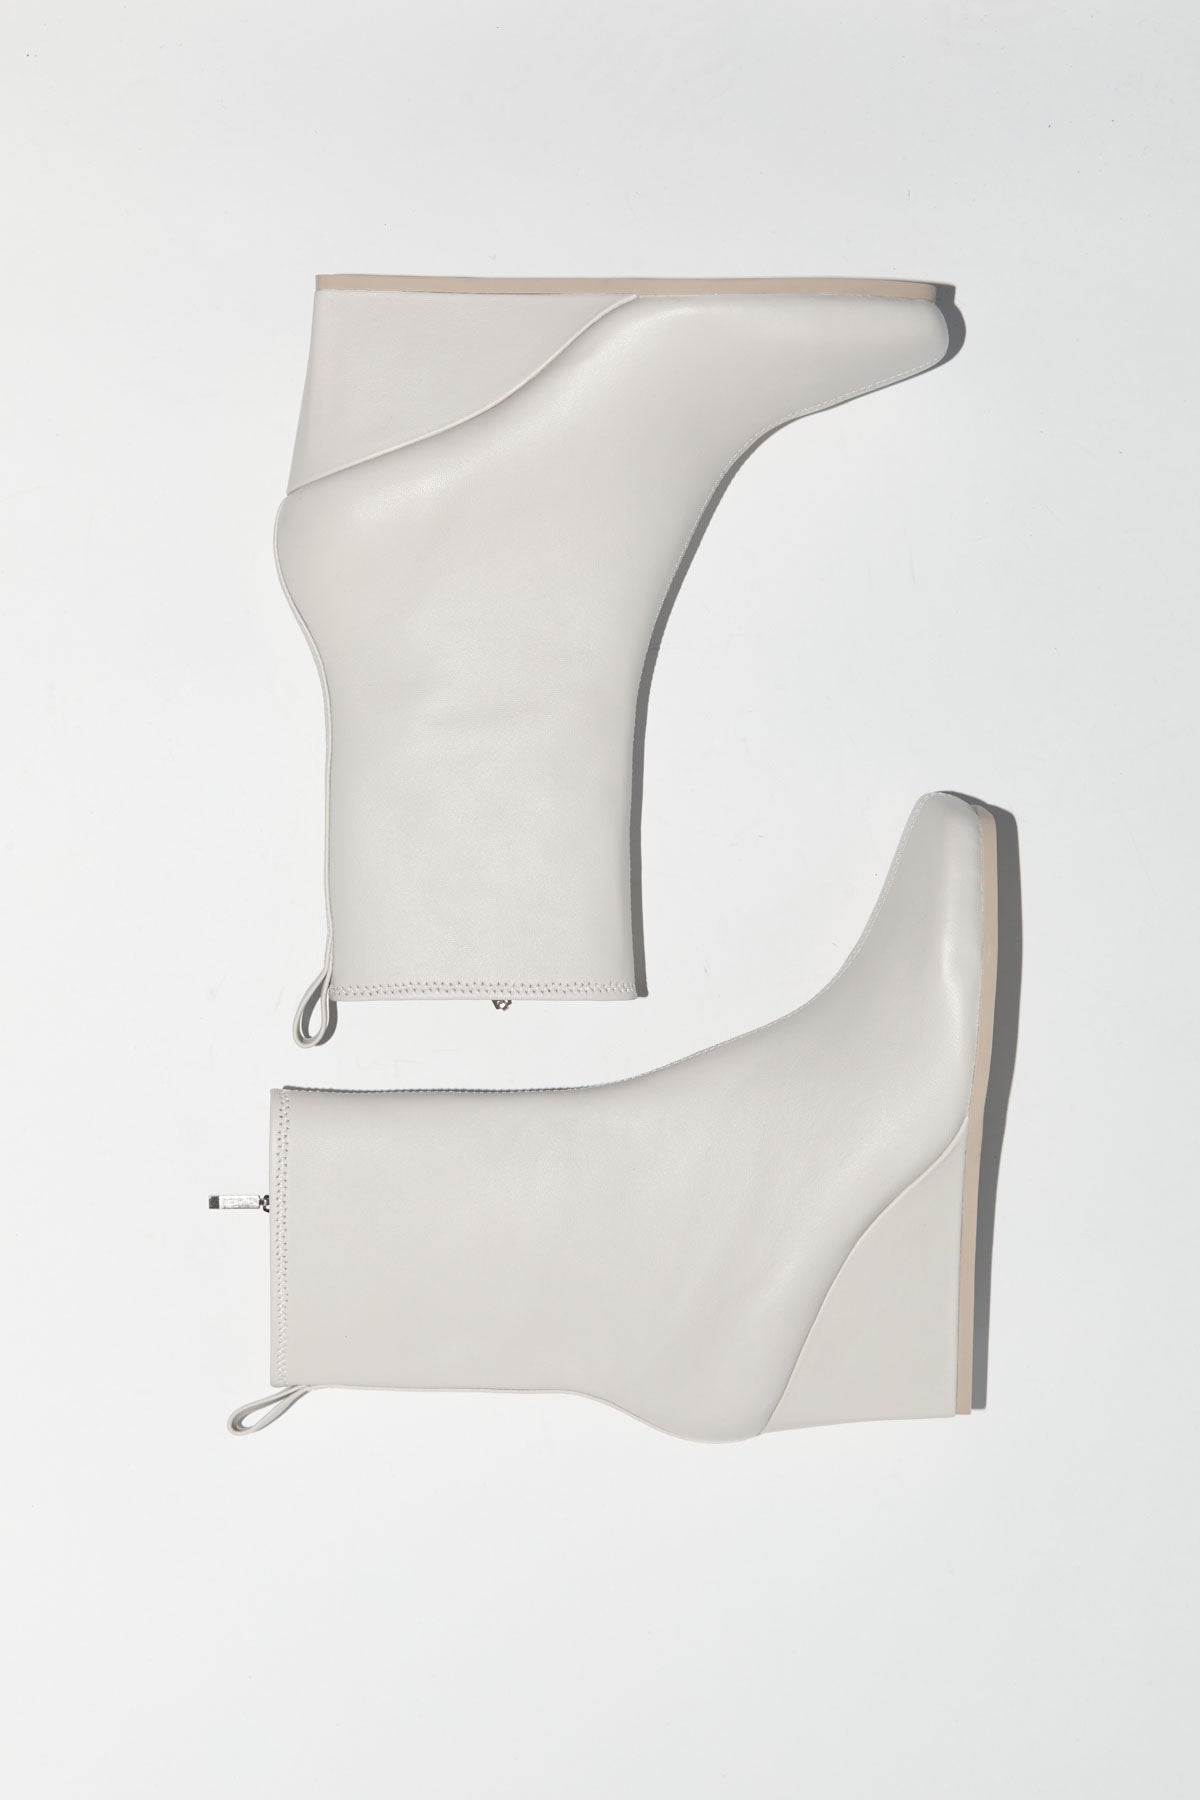 Wedge Boot - Cool White